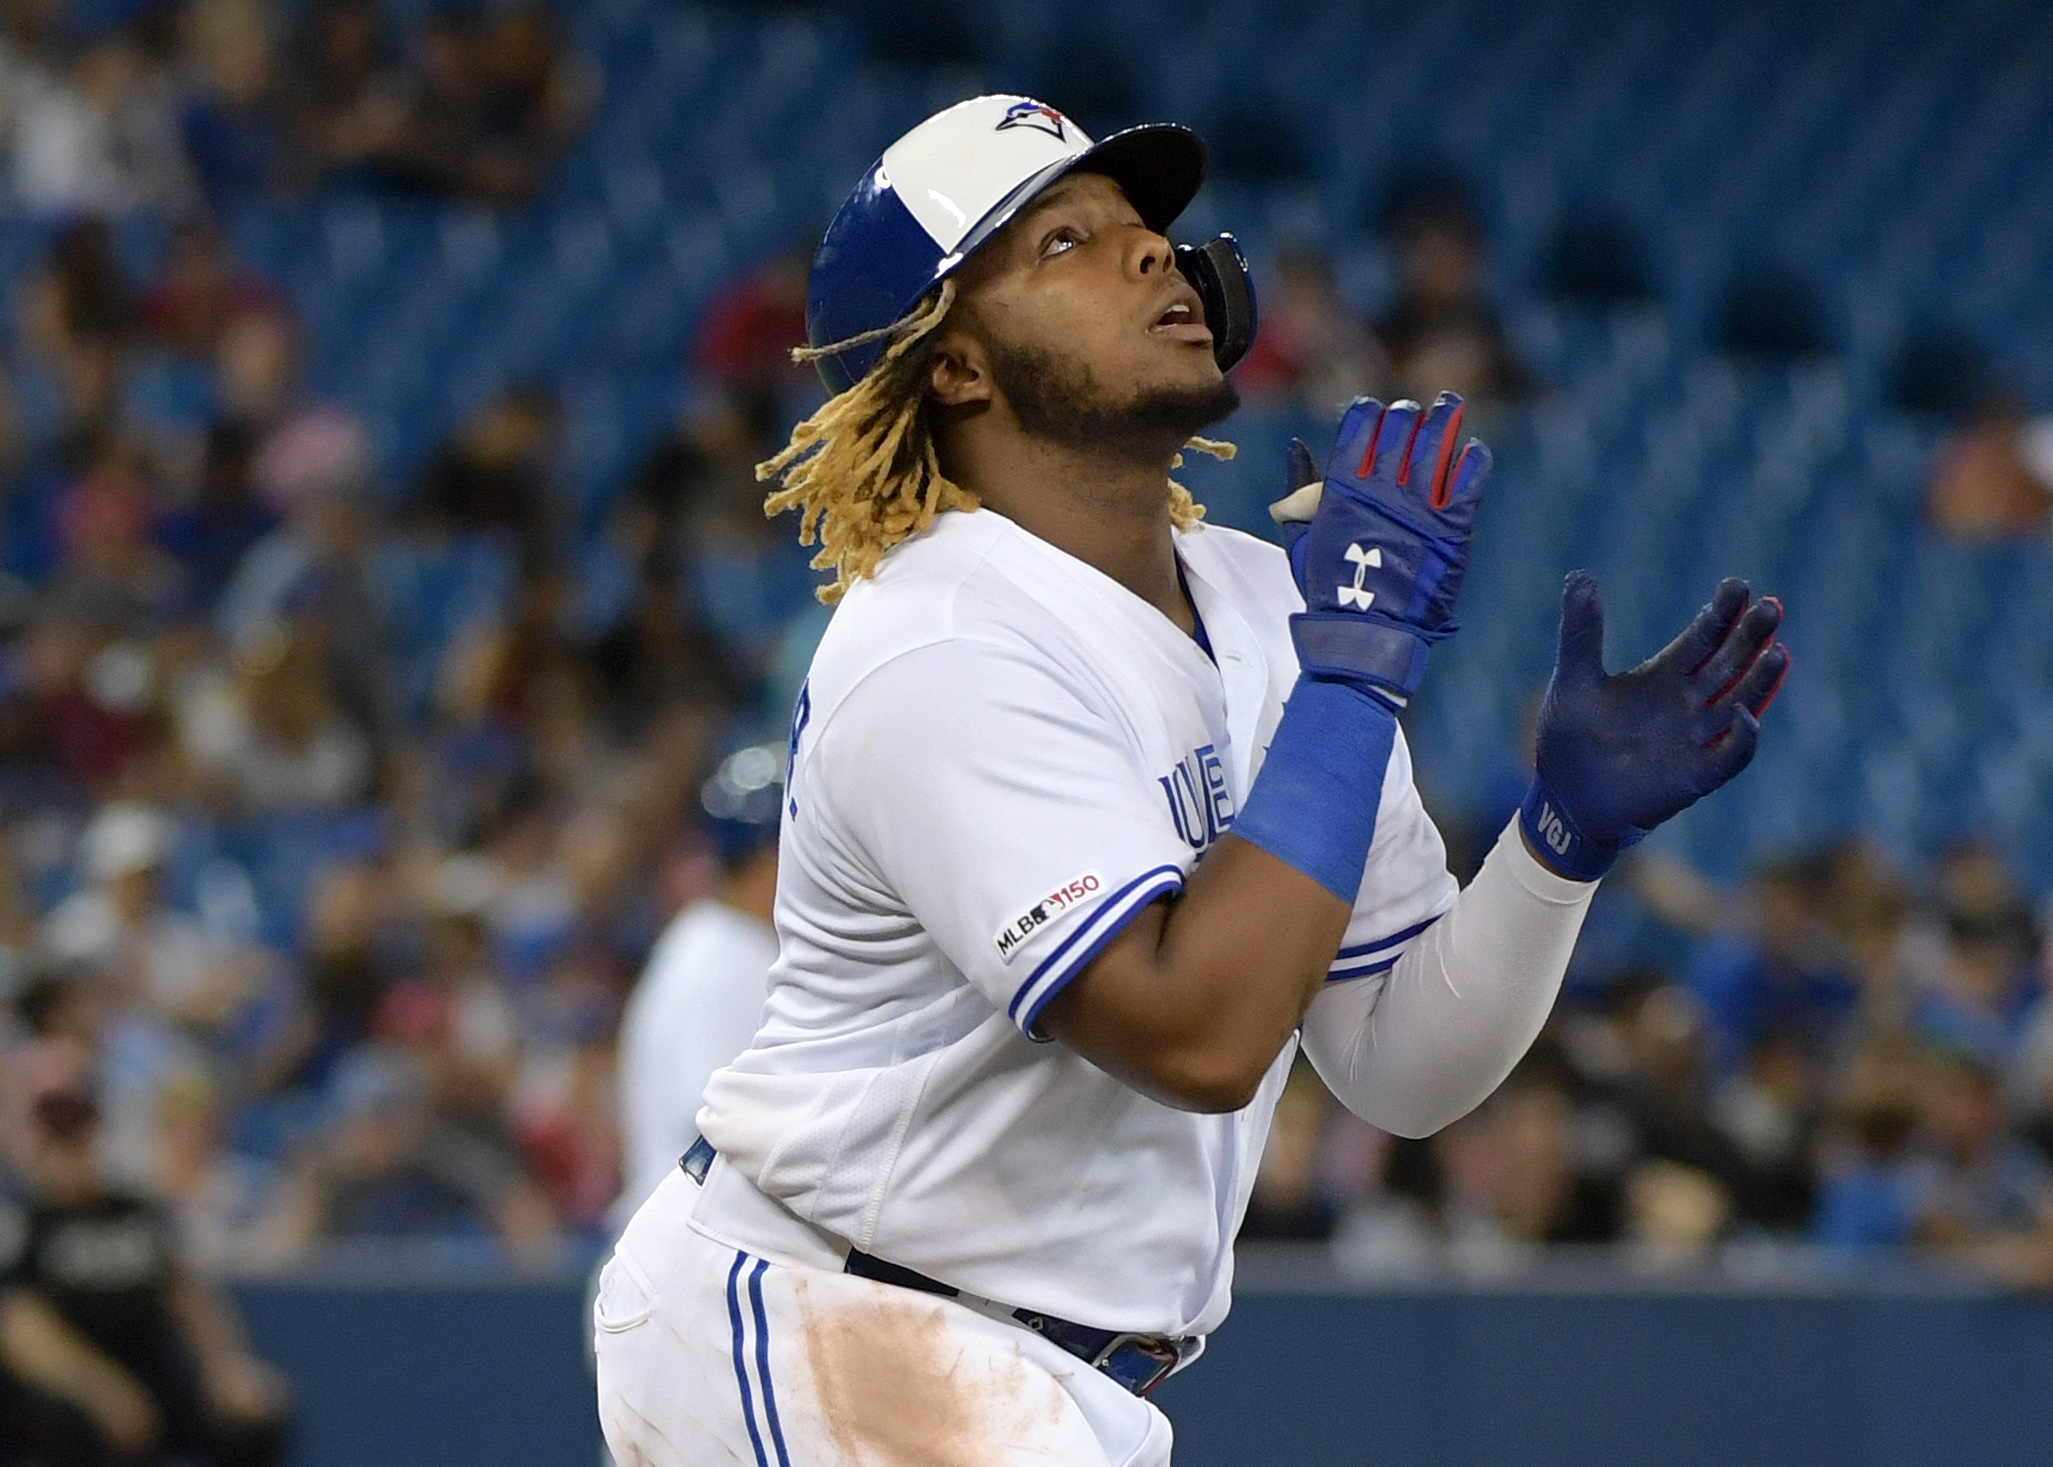 Vladimir Guerrero Jr. is crushing it, and New Hampshire has never seen  anything like him